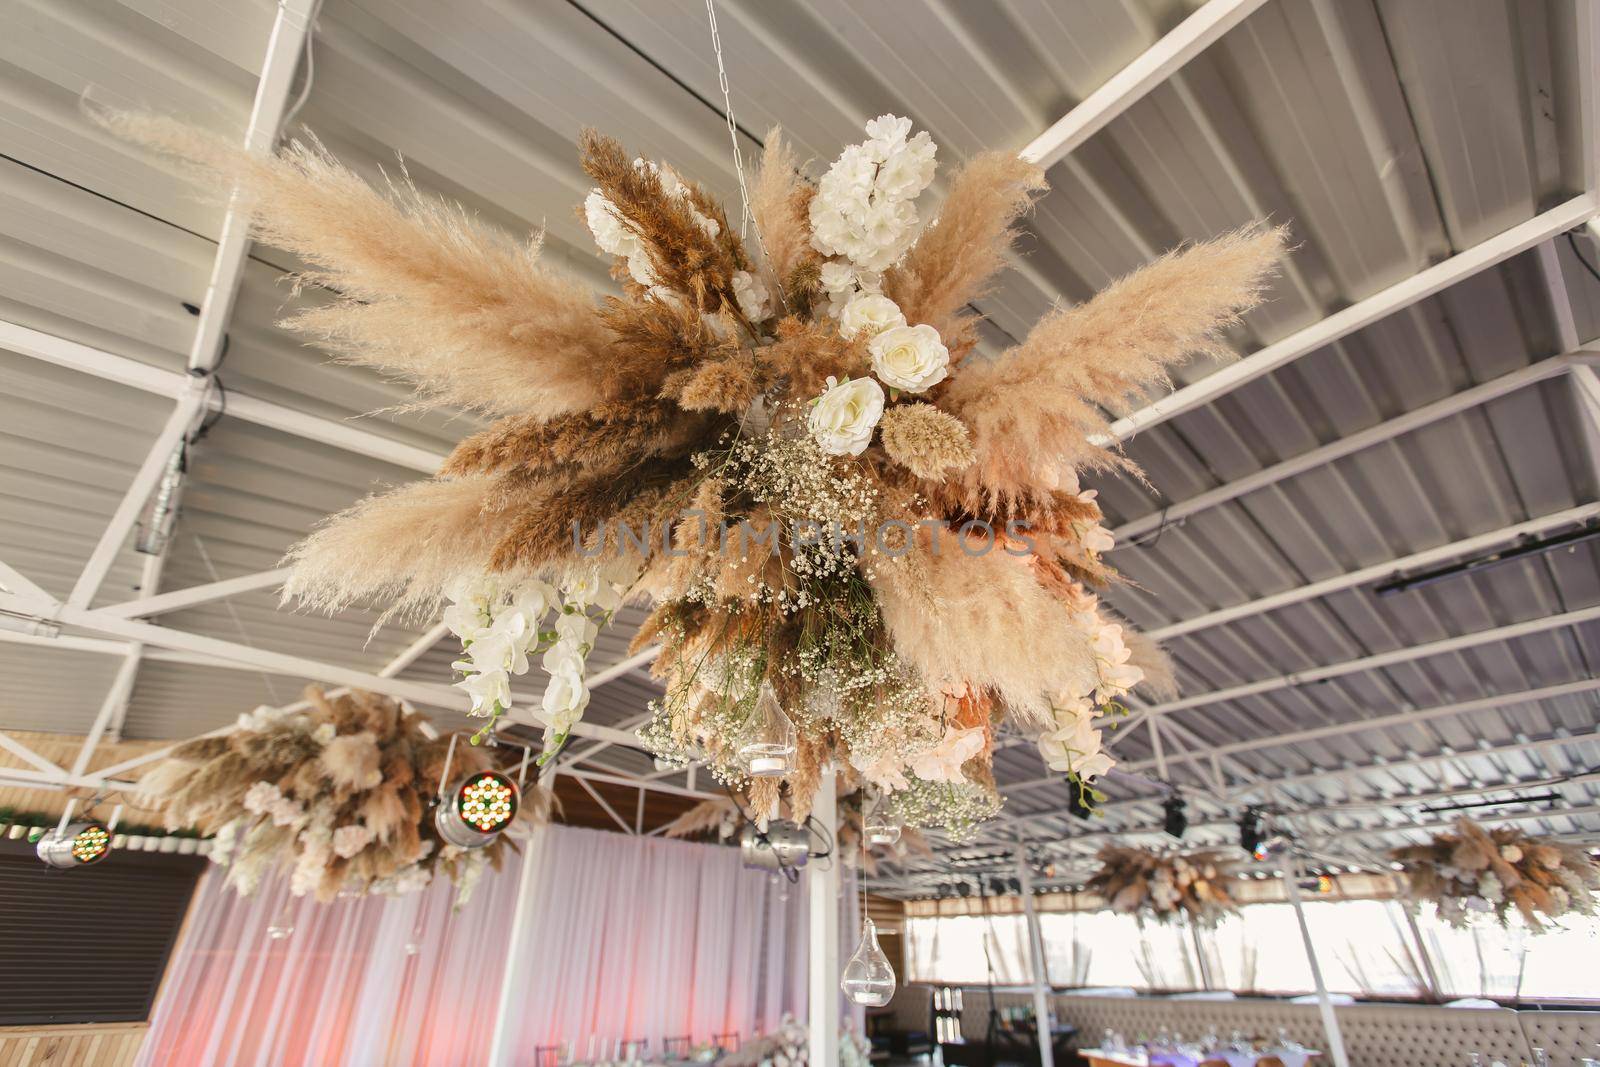 Wedding decor for newlyweds at a banquet. Floristry of dried flowers and candles in boho style by StudioPeace